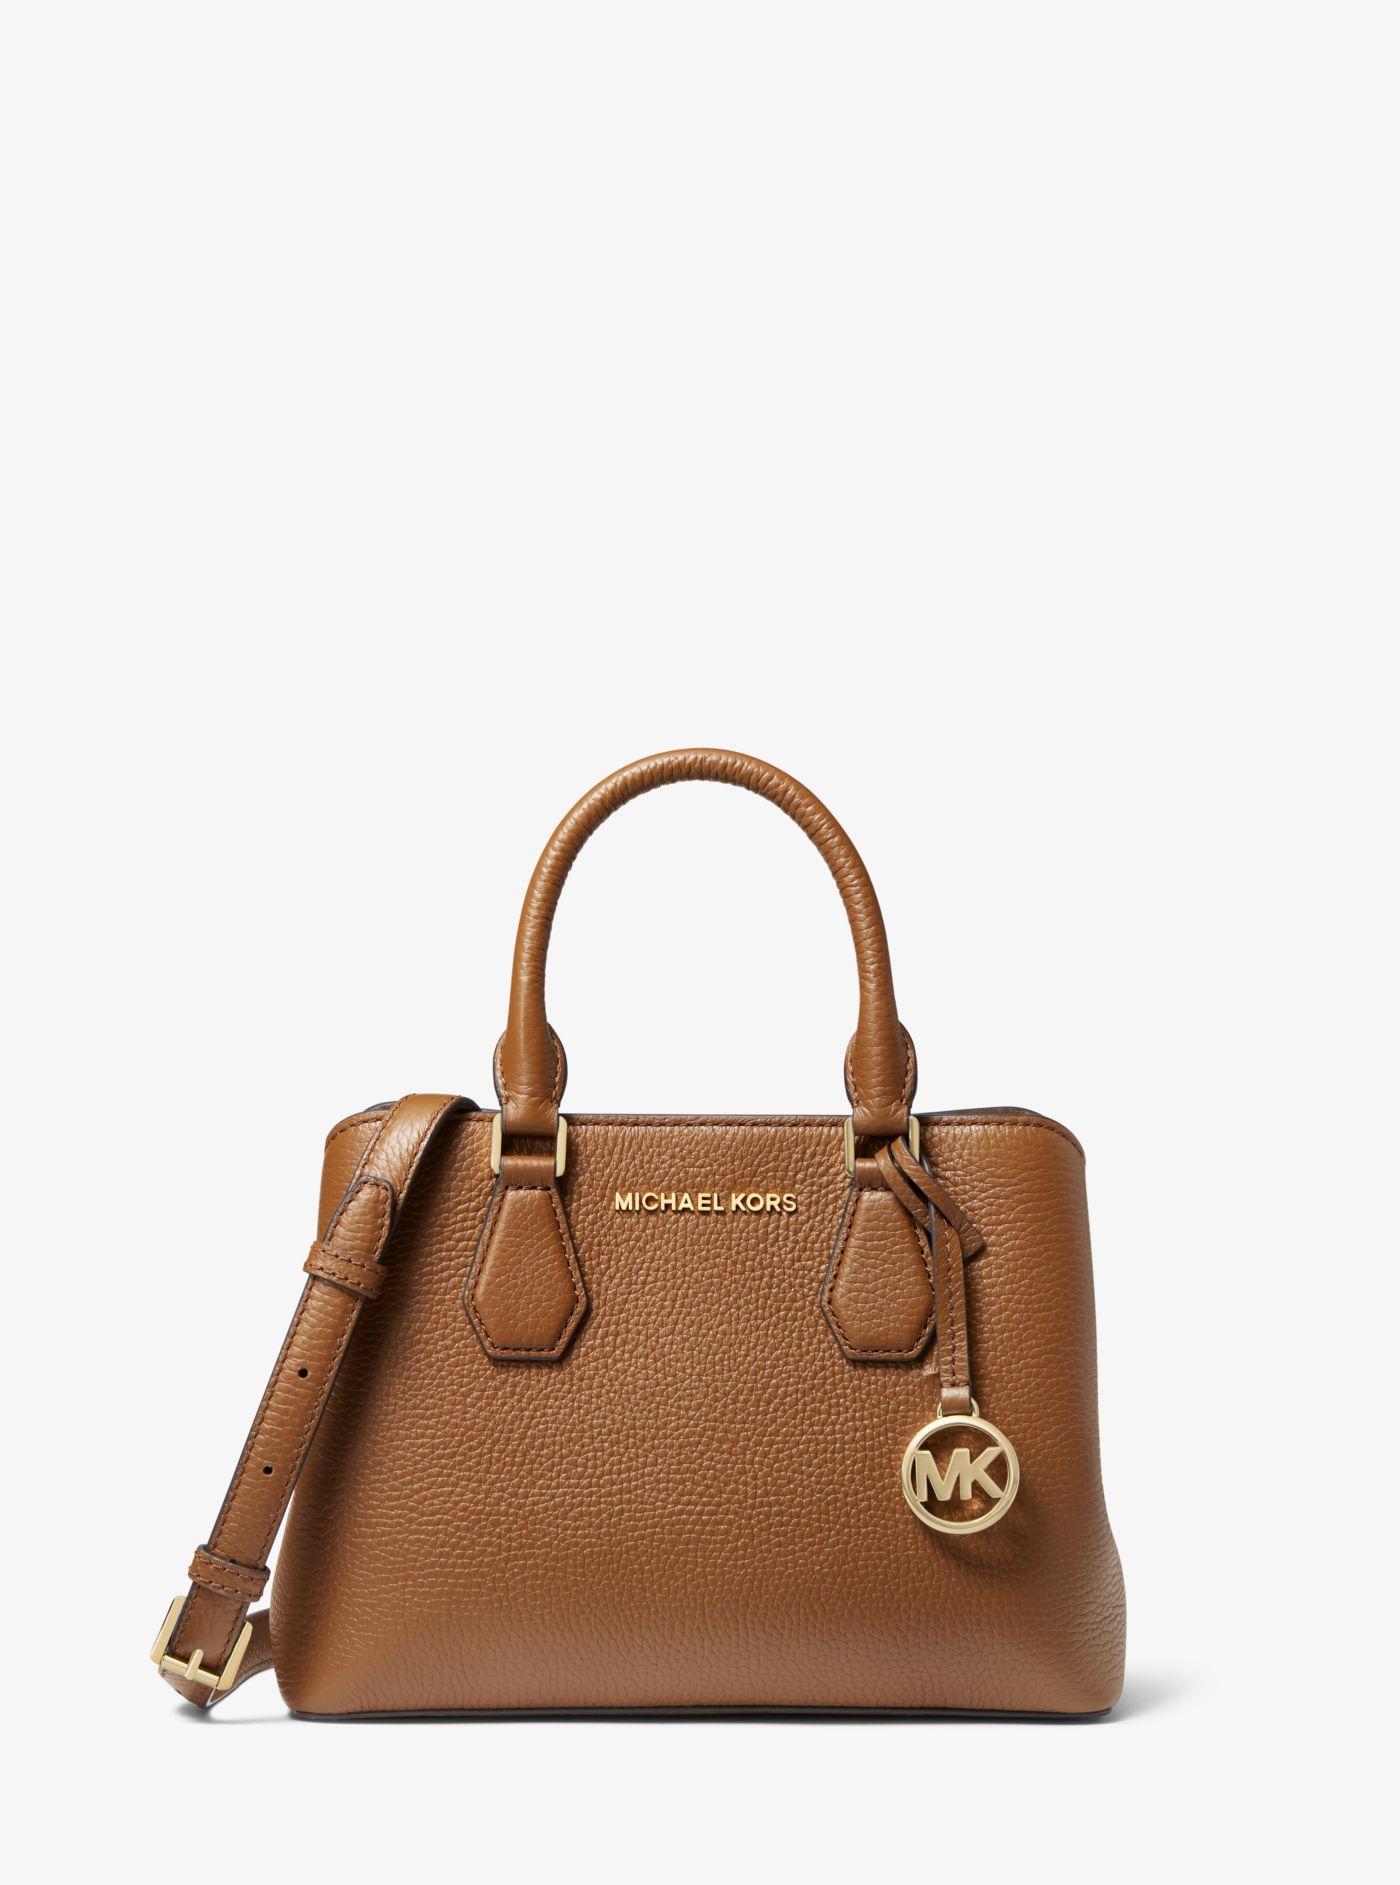 Michael Kors Camille Small Pebbled Leather Satchel in Brown | Lyst